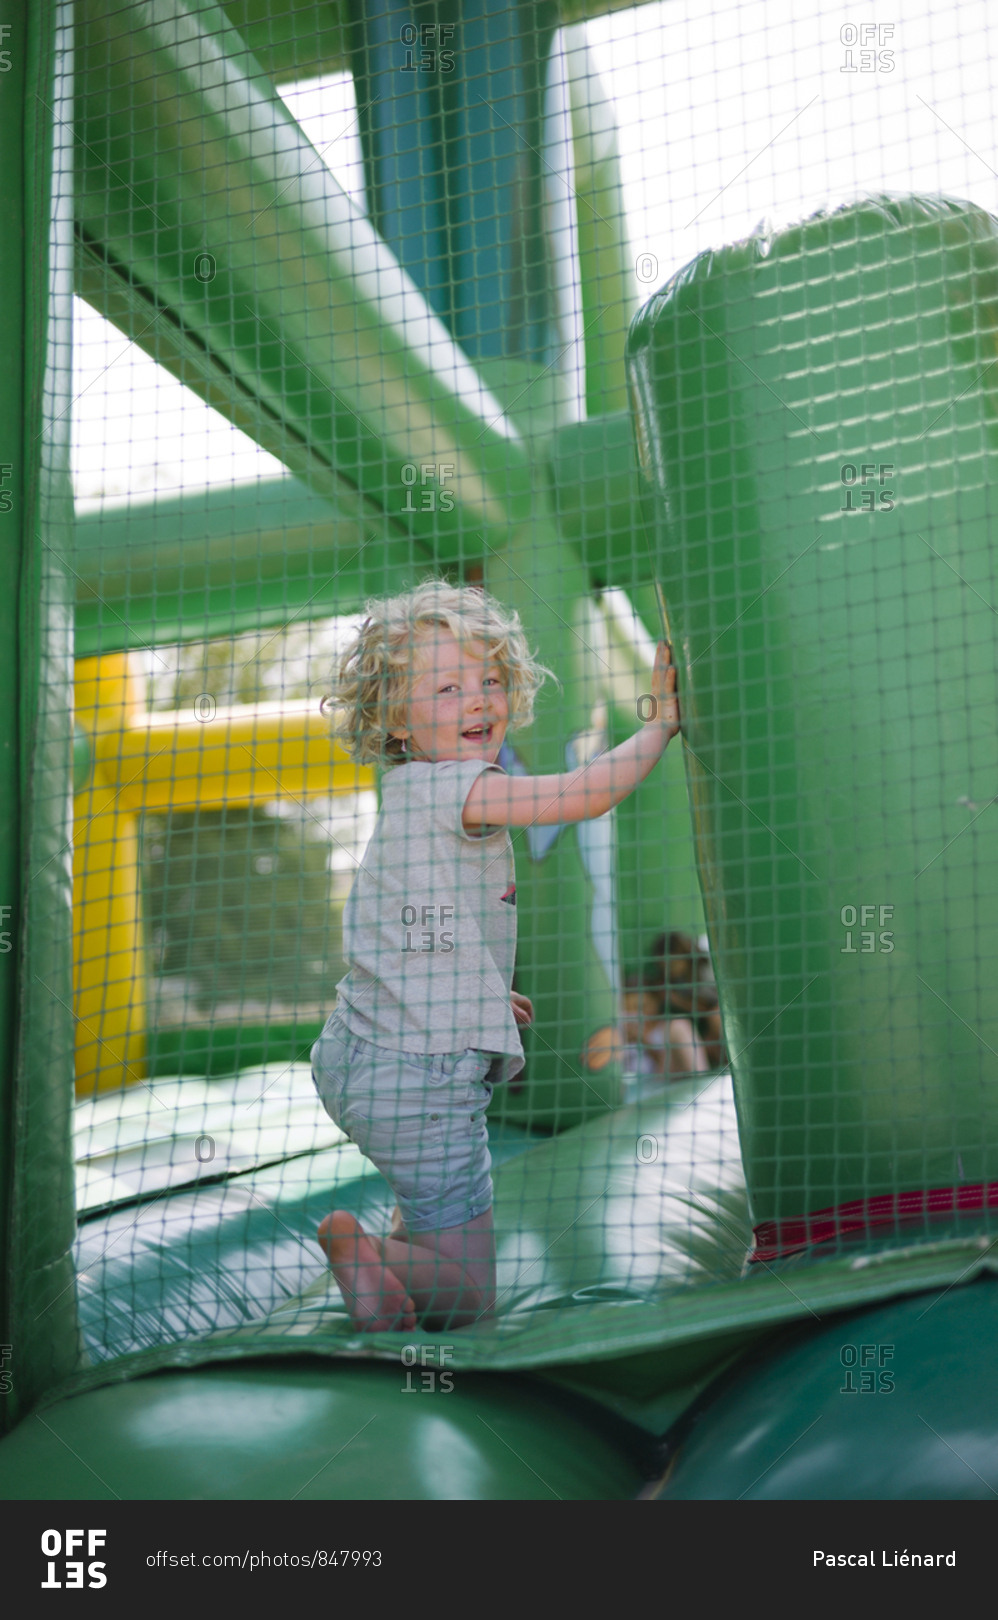 Little girl having fun in colorful green and yellow inflatable games